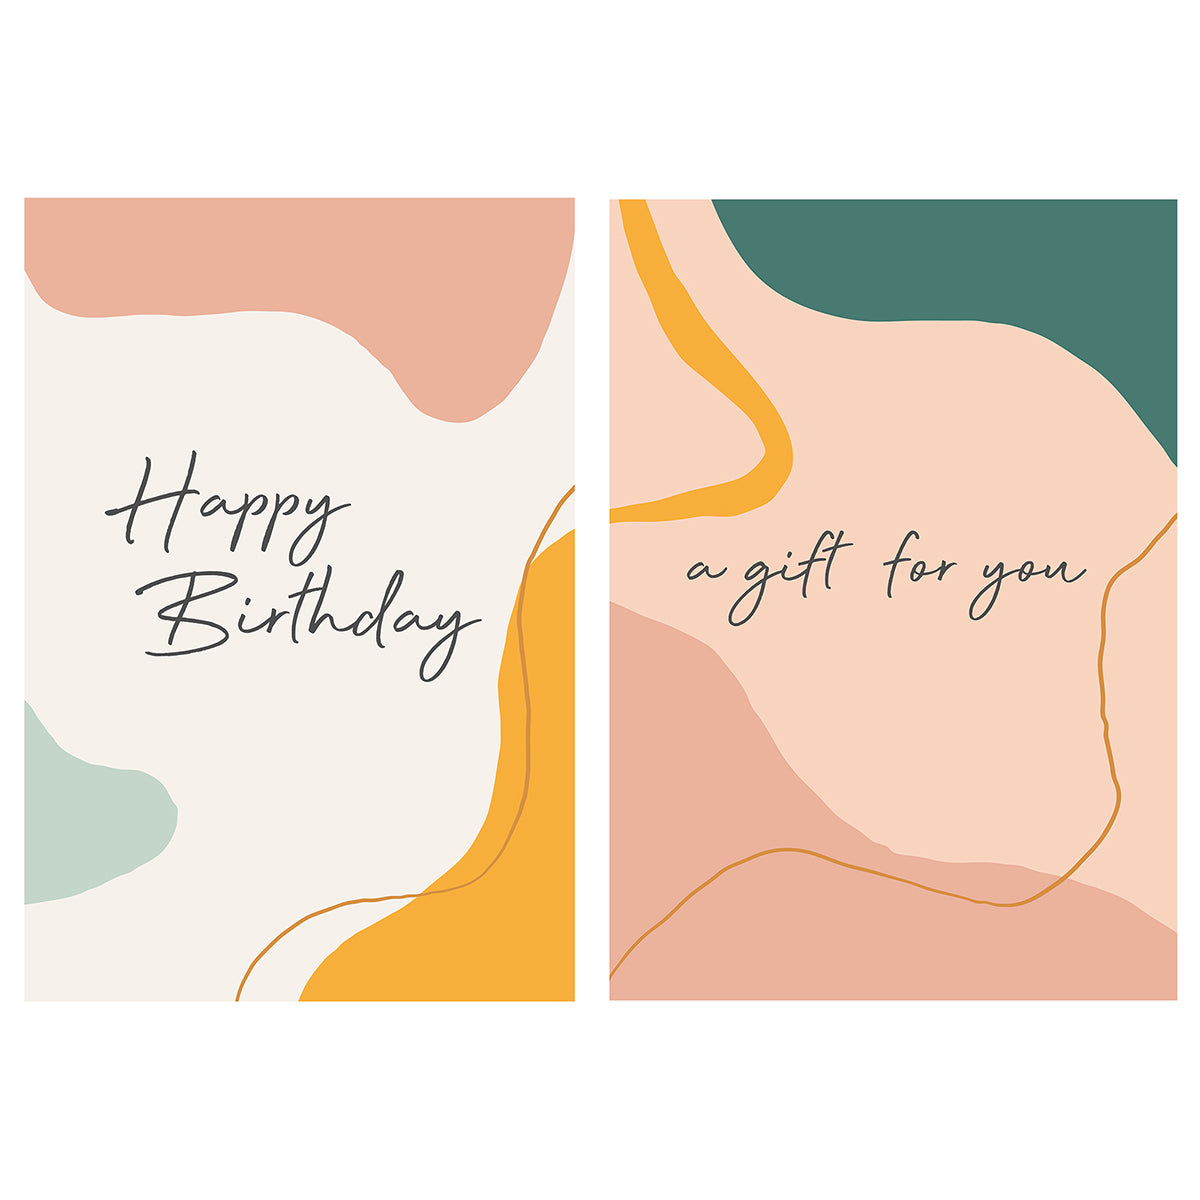 wo stylish greeting cards side by side with abstract art in muted colors of peach, green, and mustard. The left card reads 'Happy Birthday' in elegant cursive, while the right card says 'a gift for you,' offering a warm and modern way to present gifts from 360 Botanics